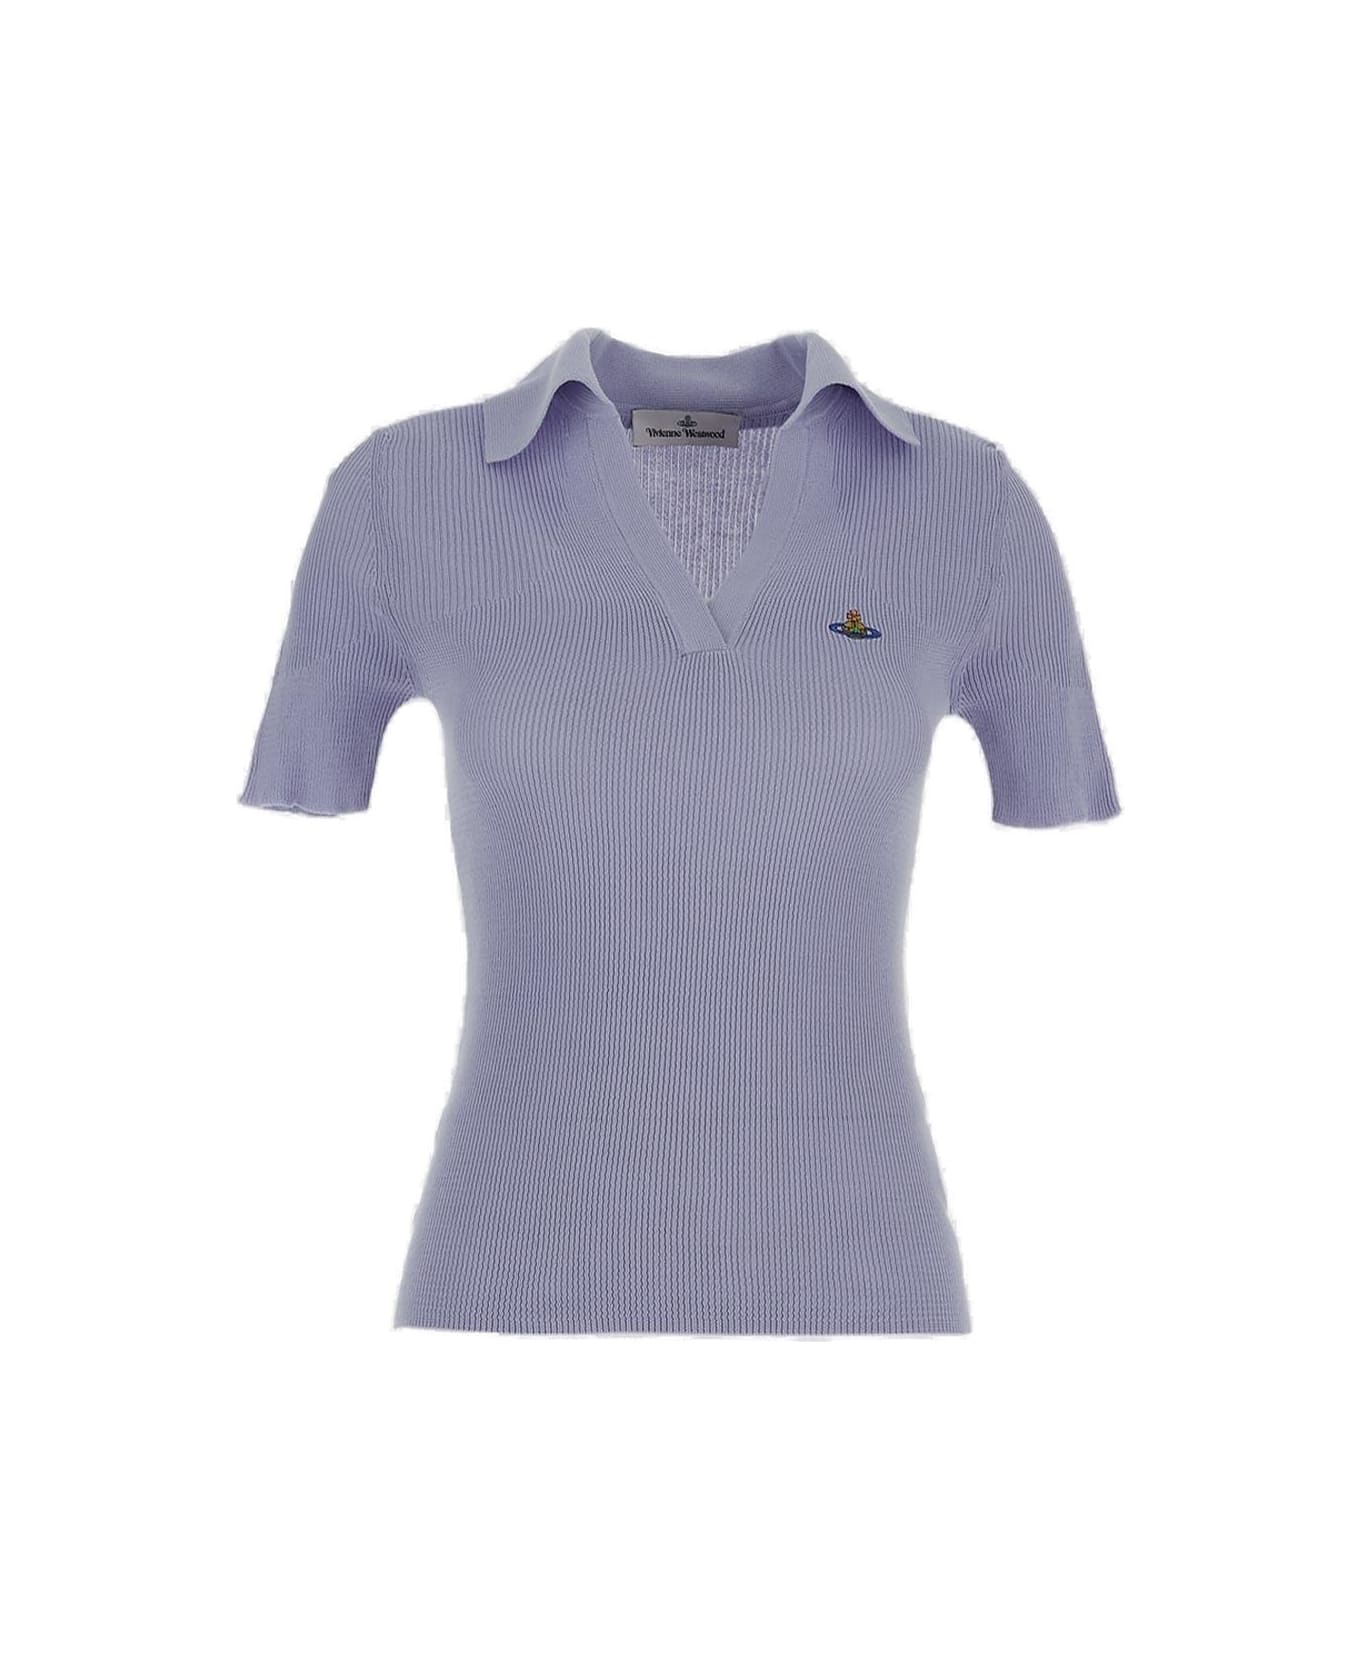 Vivienne Westwood Marina Knitted Polo Shirt - LILAC ポロシャツ